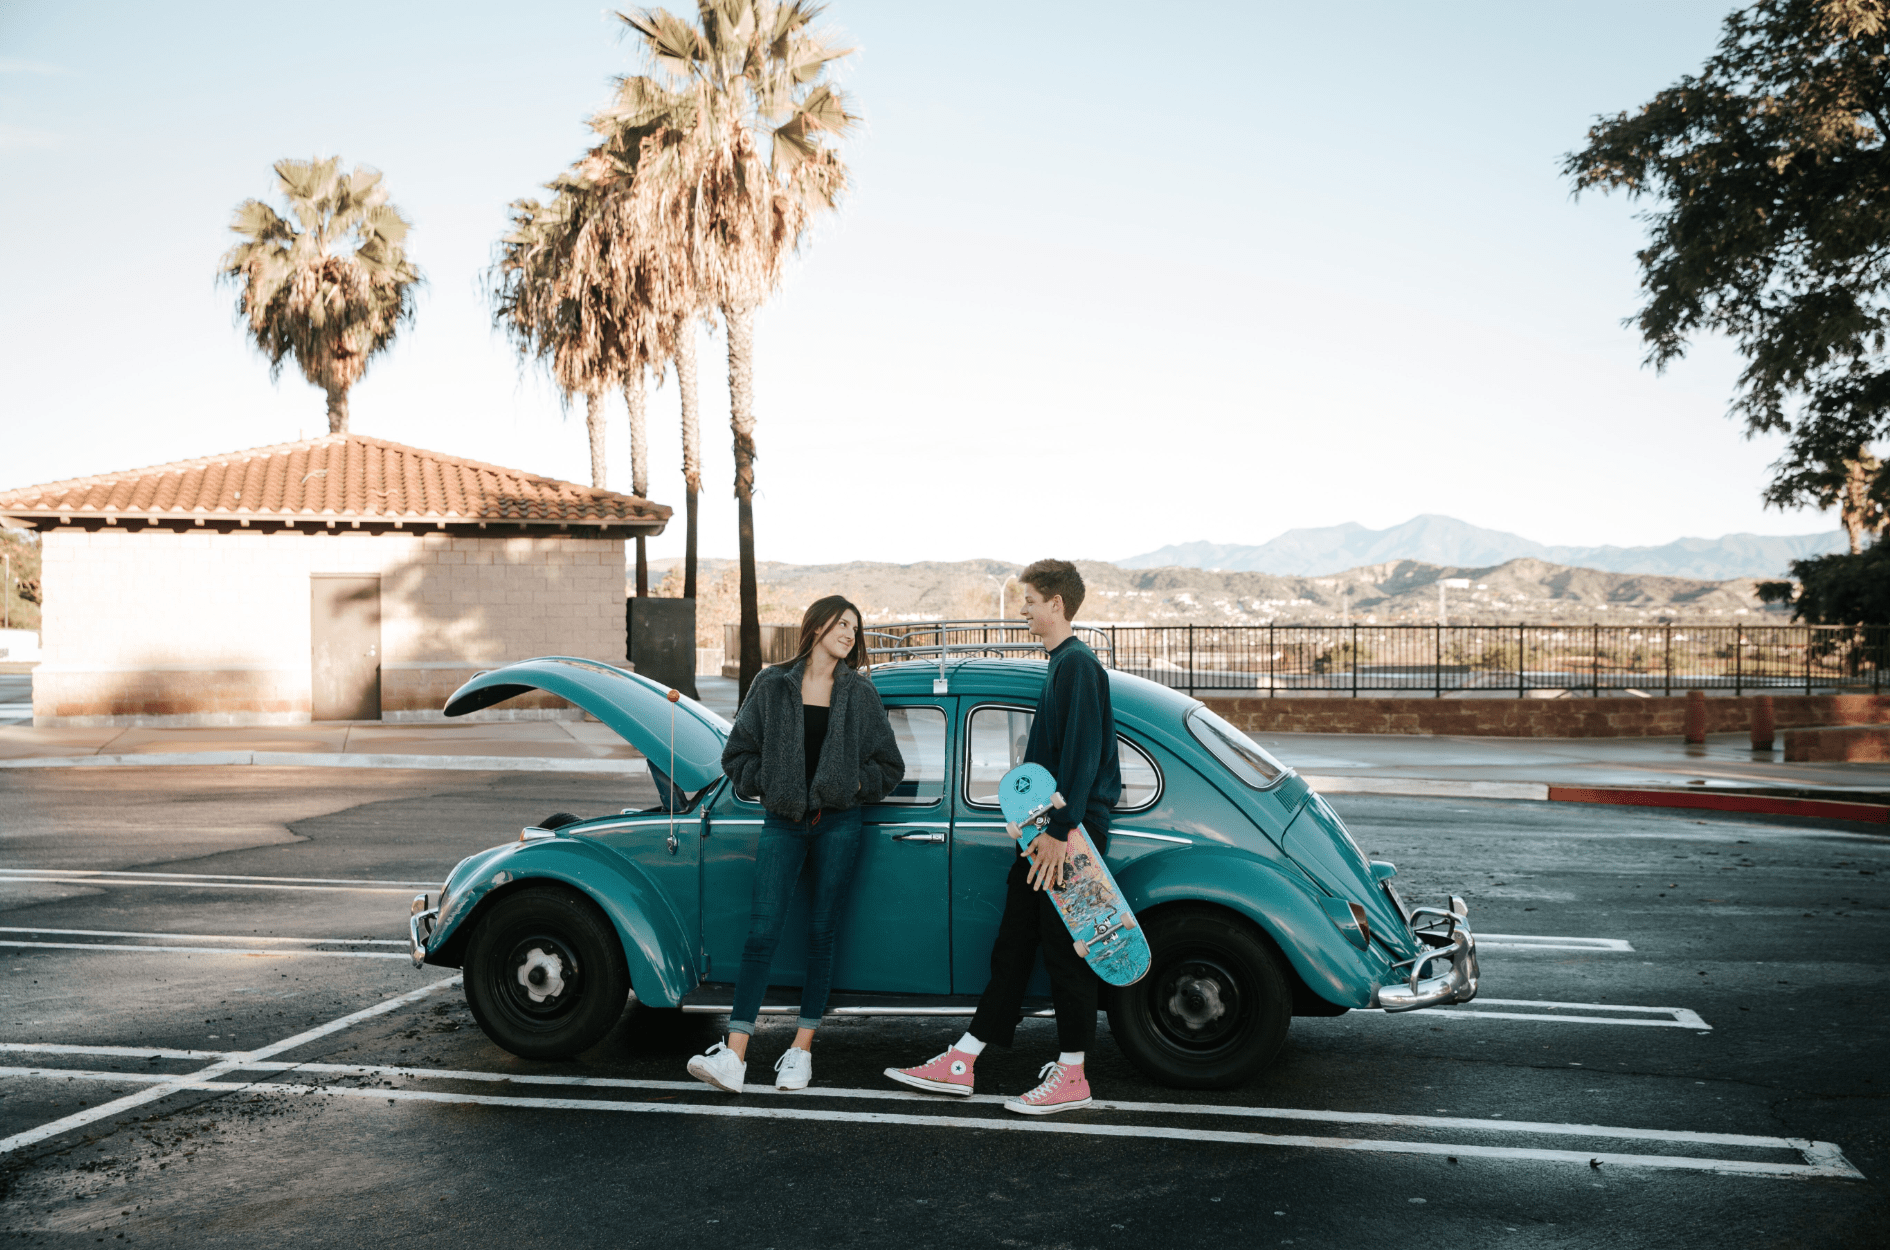 Skateboarder guy and a girl in front of a VW bug